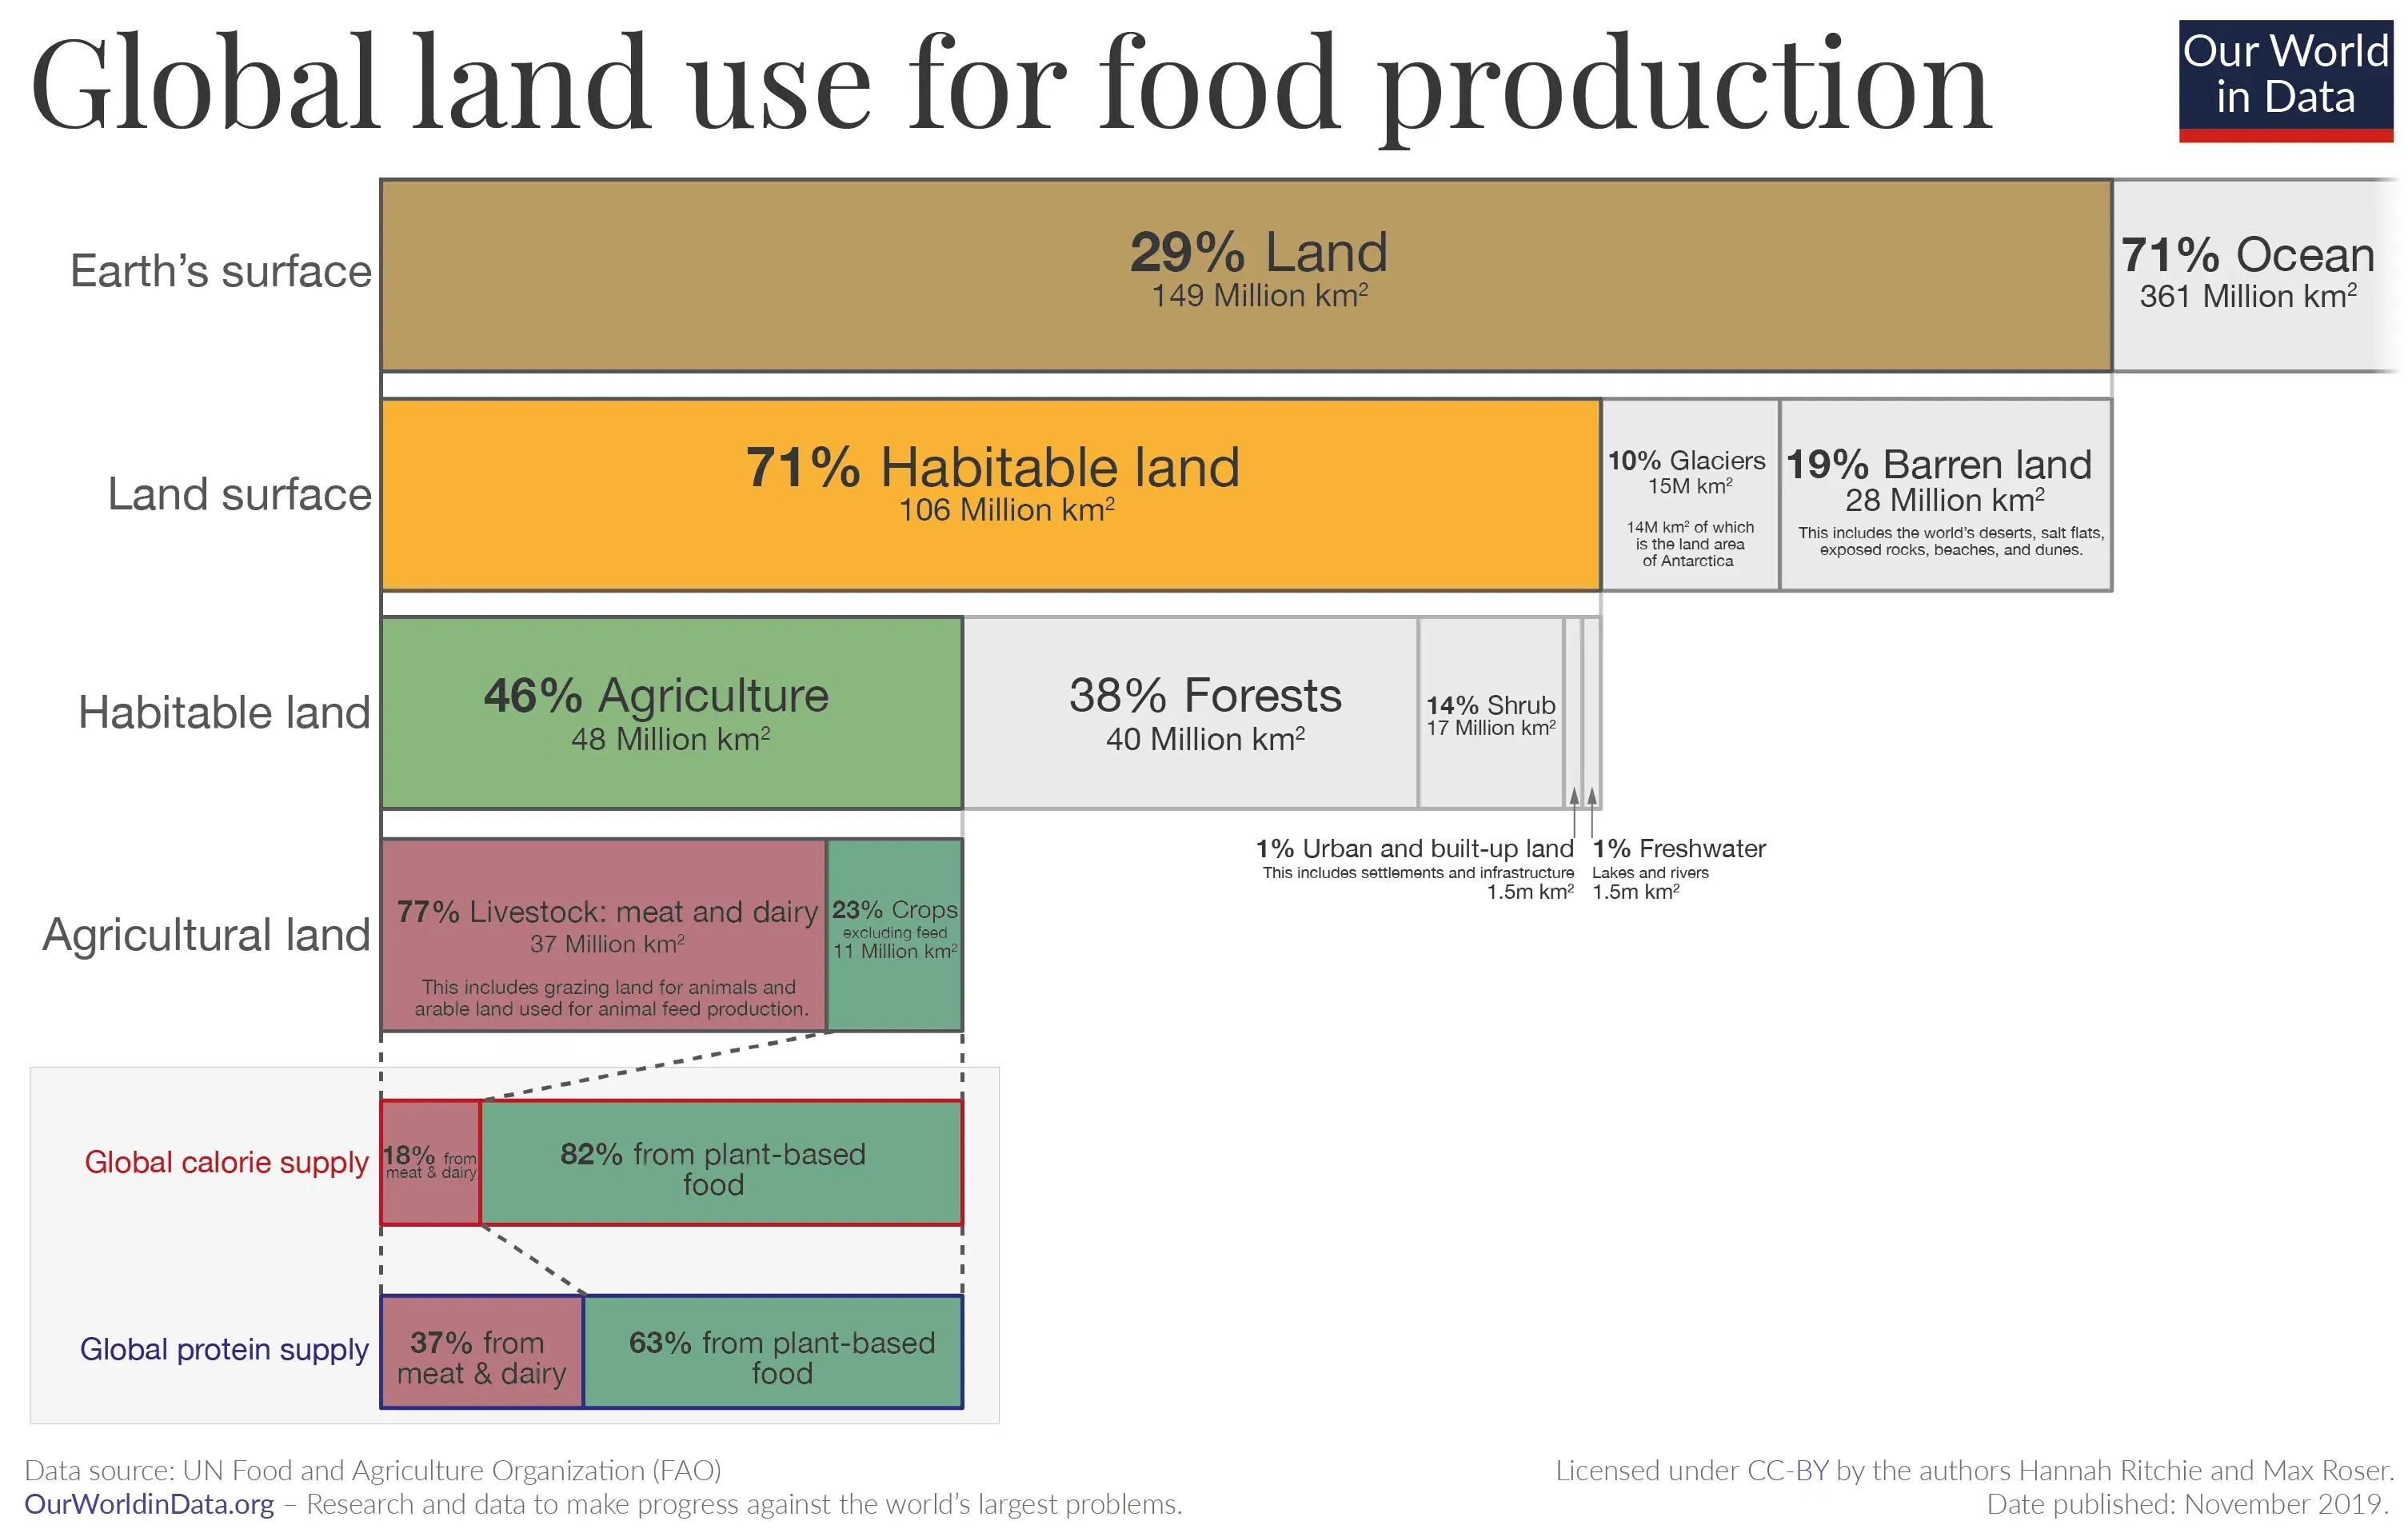 An Overview of Global Land Use